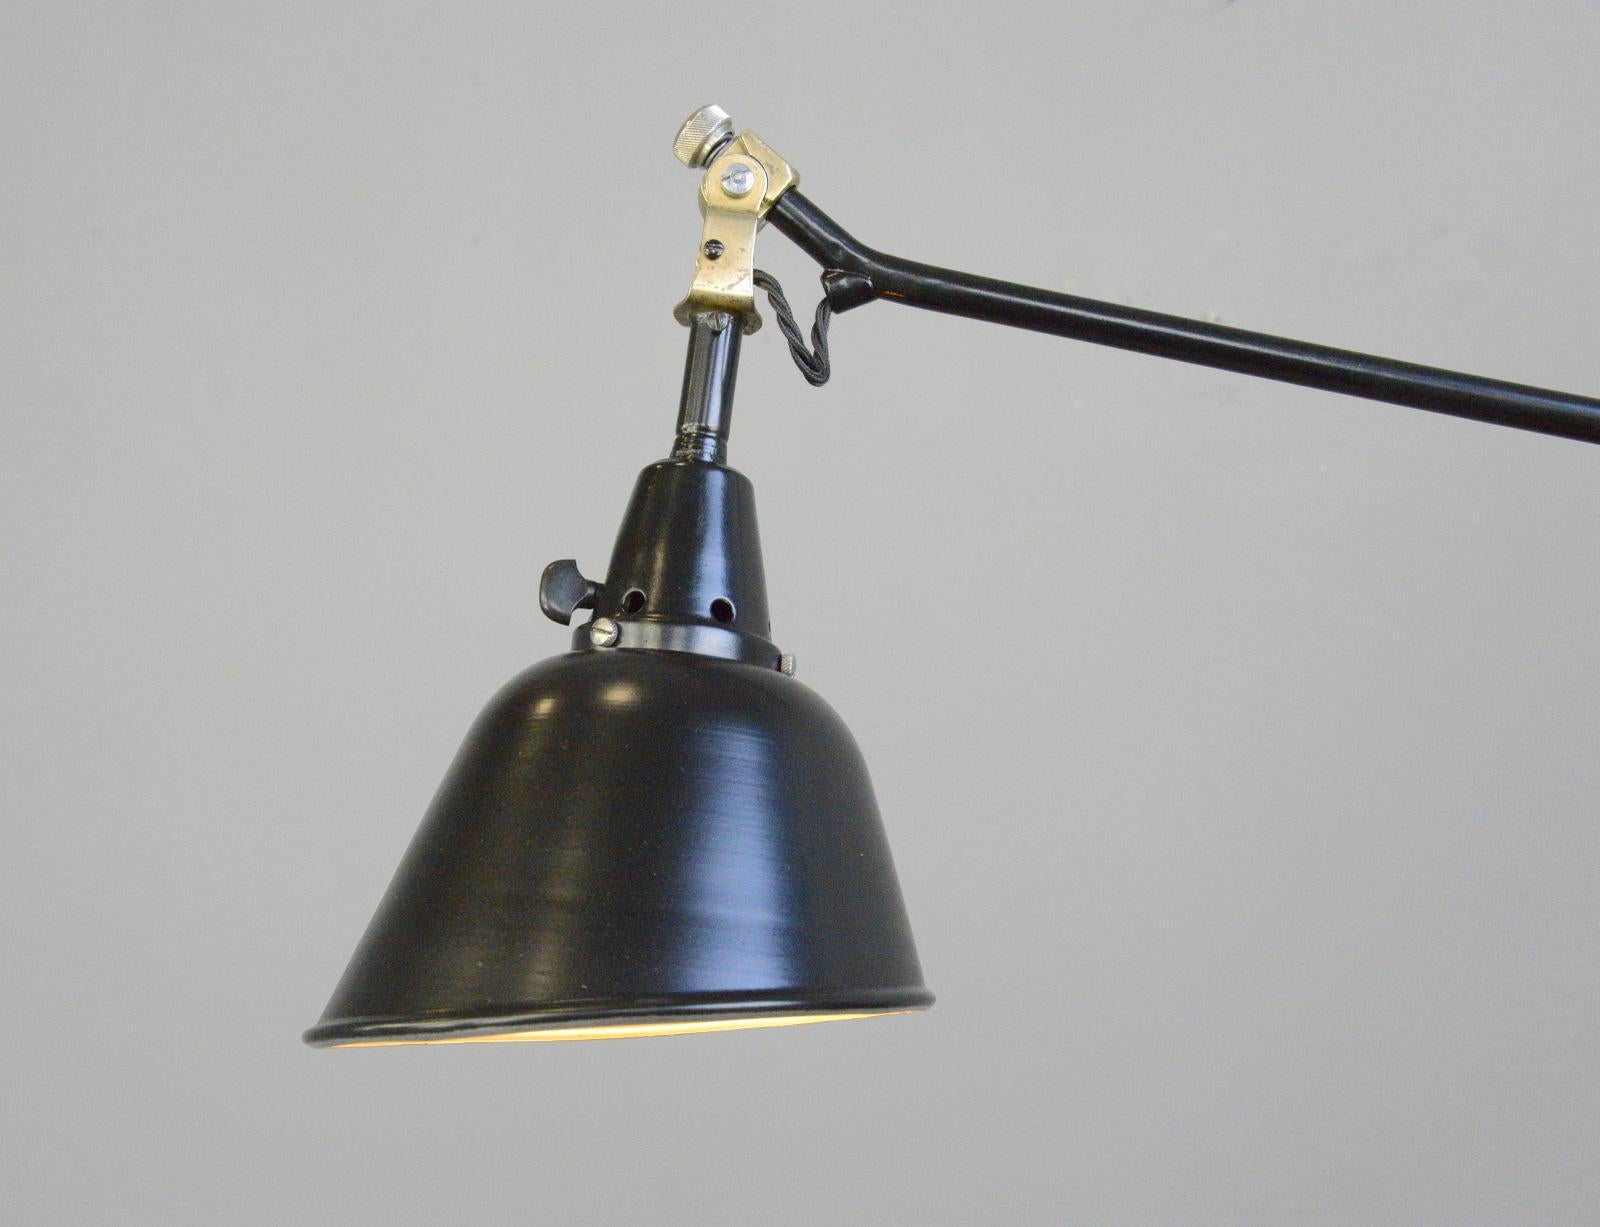 Midgard Typ 114 table lamp by Curt Fischer, circa 1930s

- Fully articulated
- Clamp on with original Bakelite knob
- Aluminium shade
- Takes E27 fitting bulbs
- On/Off toggle switch on the head of the lamp
- Designed by Curt Fischer 
-